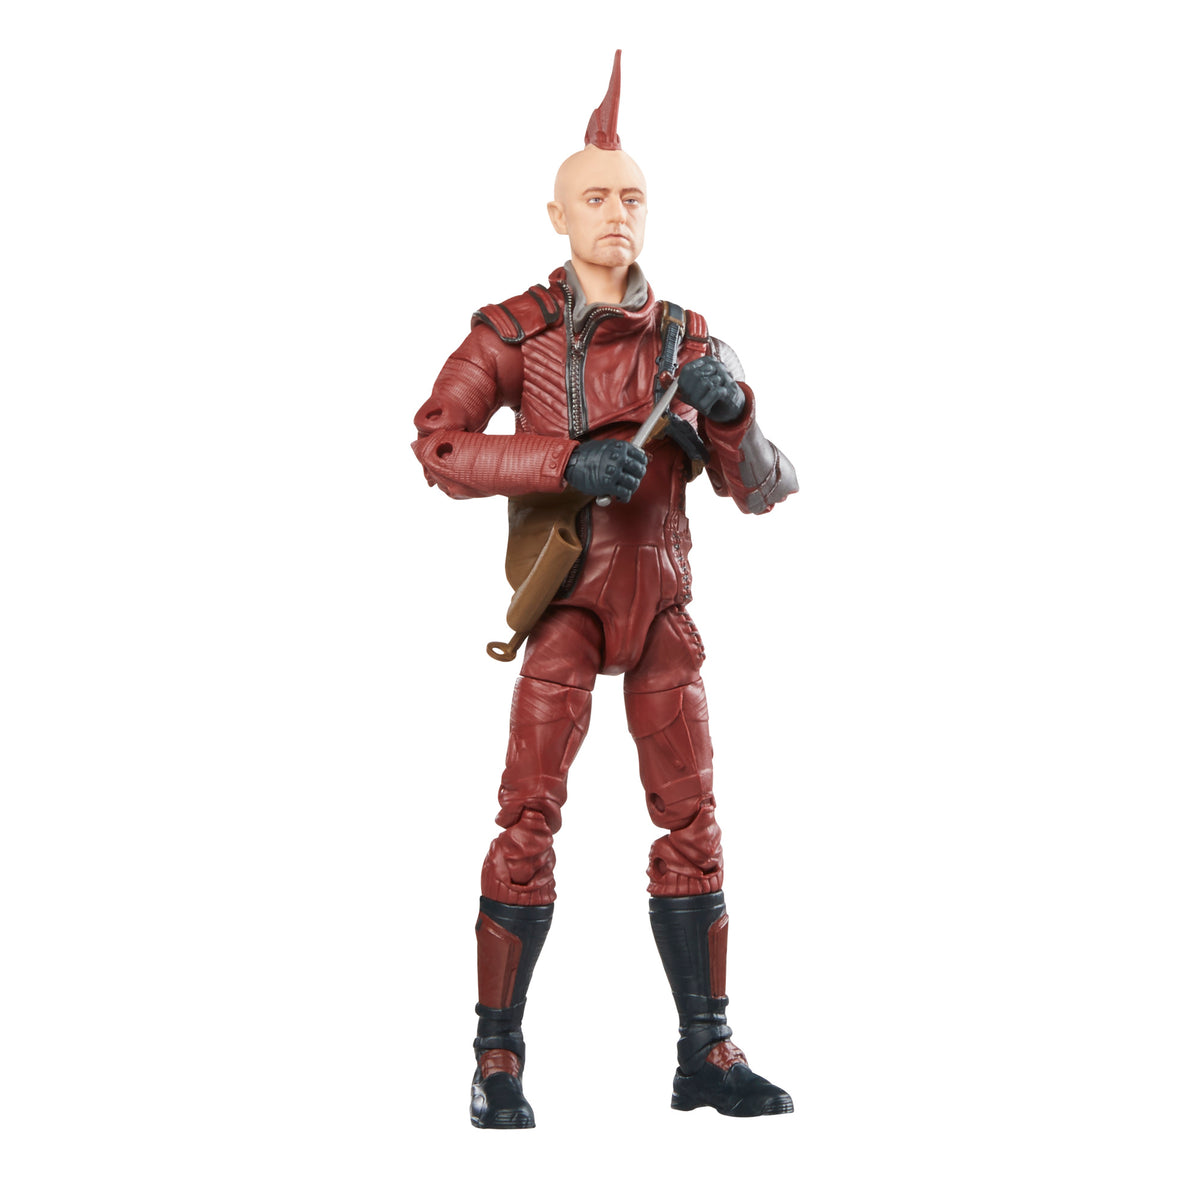 Marvel Legends Series Star-Lord, Guardians of the Galaxy Vol. 3 – Hasbro  Pulse